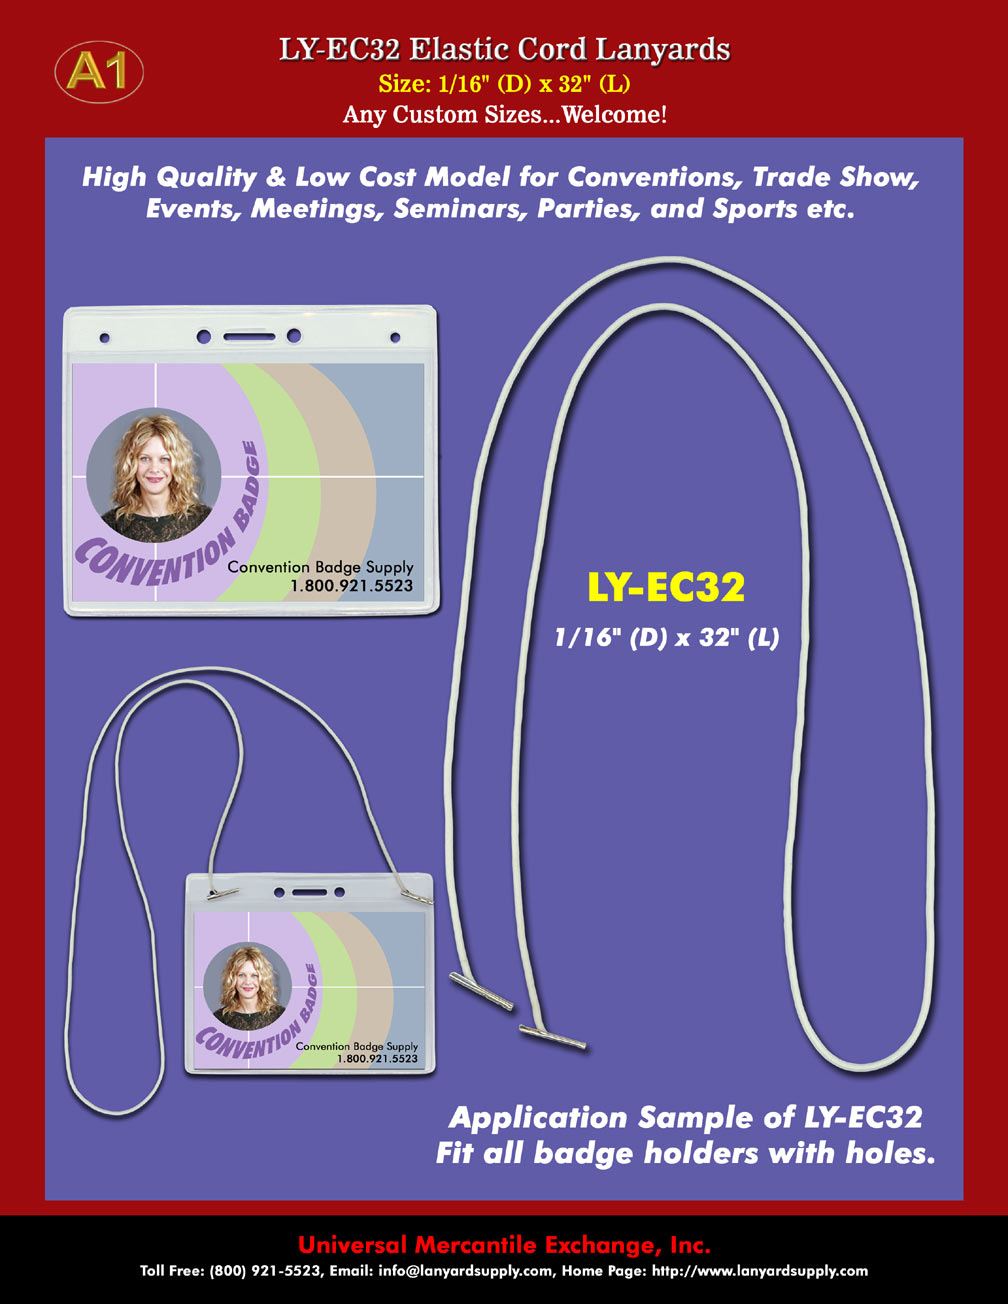 Lanyards: Elastic Cord Lanyard Supplies For Meetings, Events, Conventions or Trade Show Badge Holder